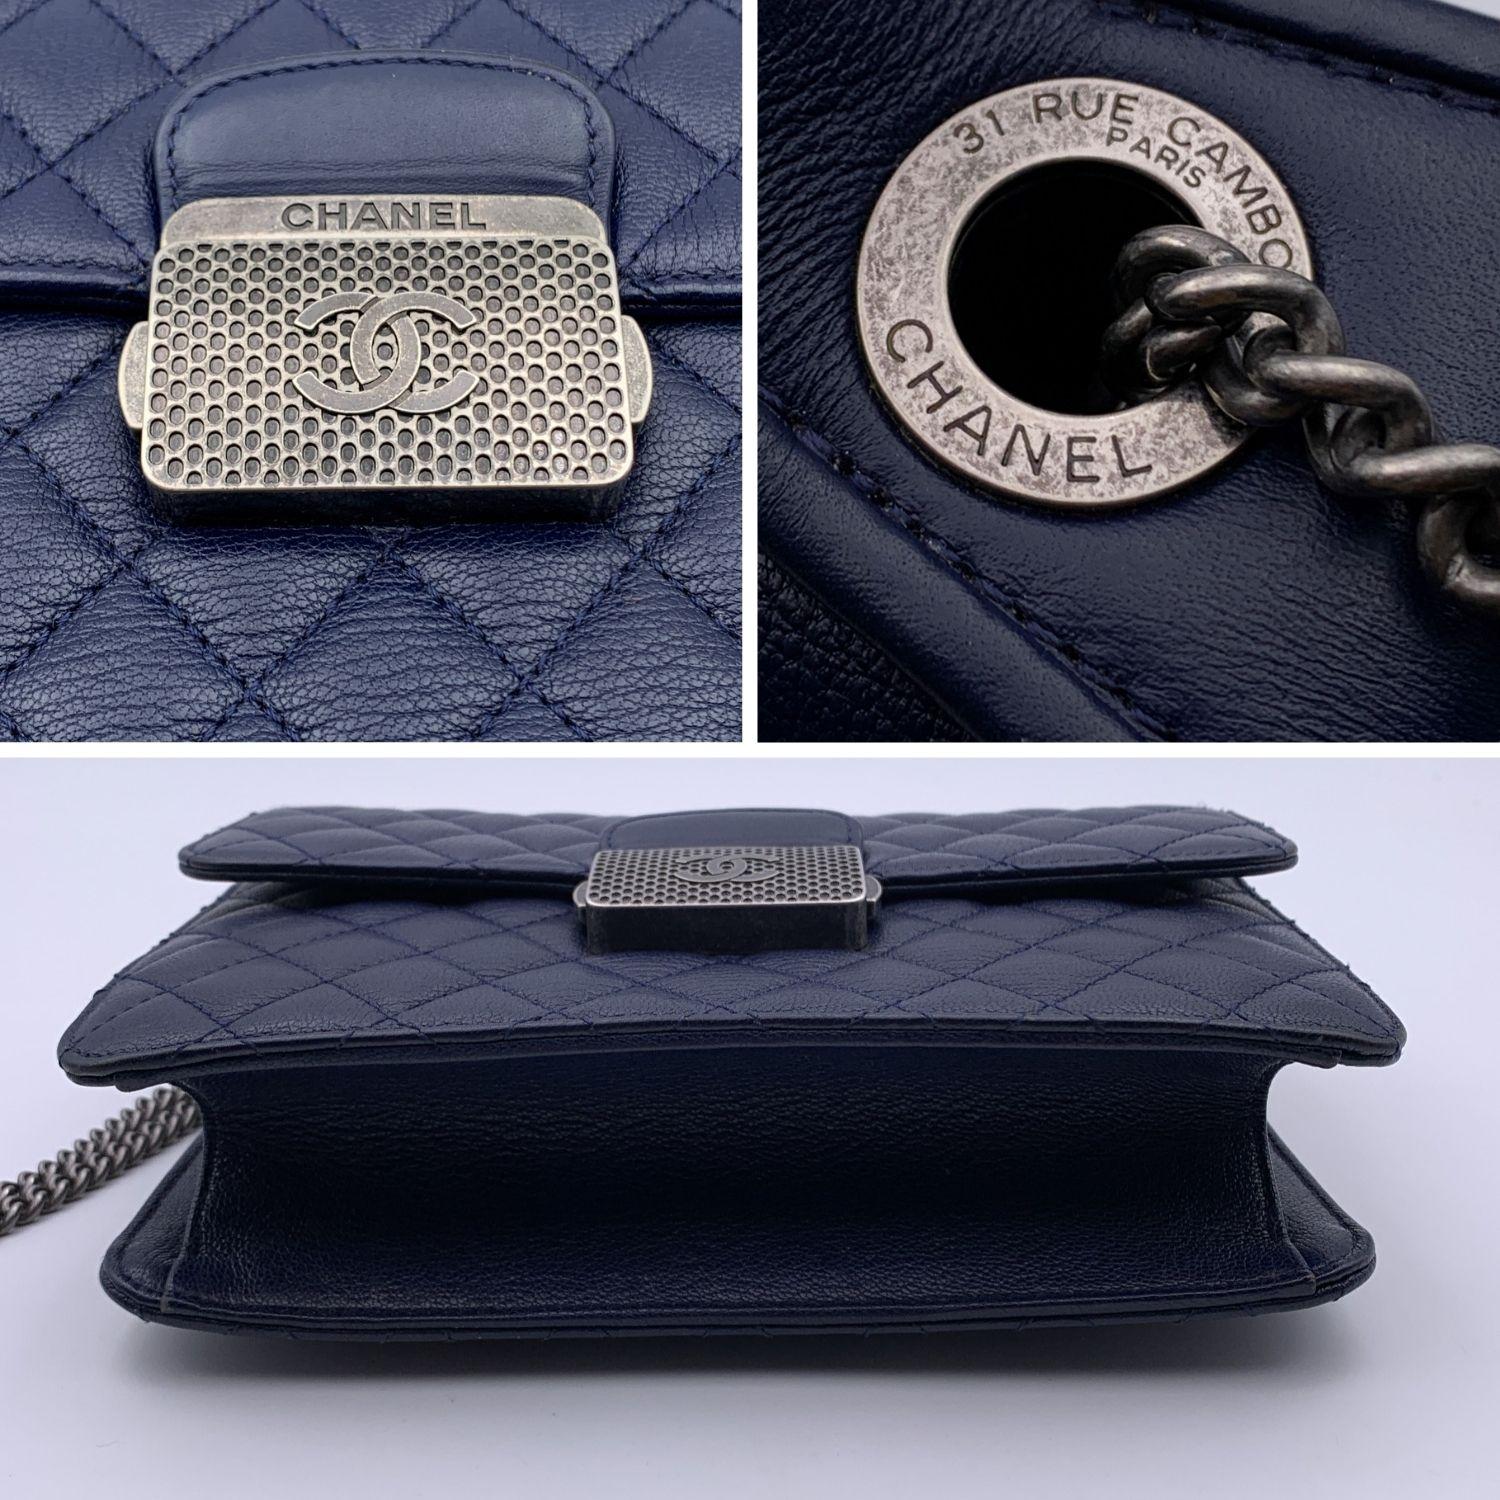 Women's Chanel Blue Quilted Leather Small University Crossbody Bag